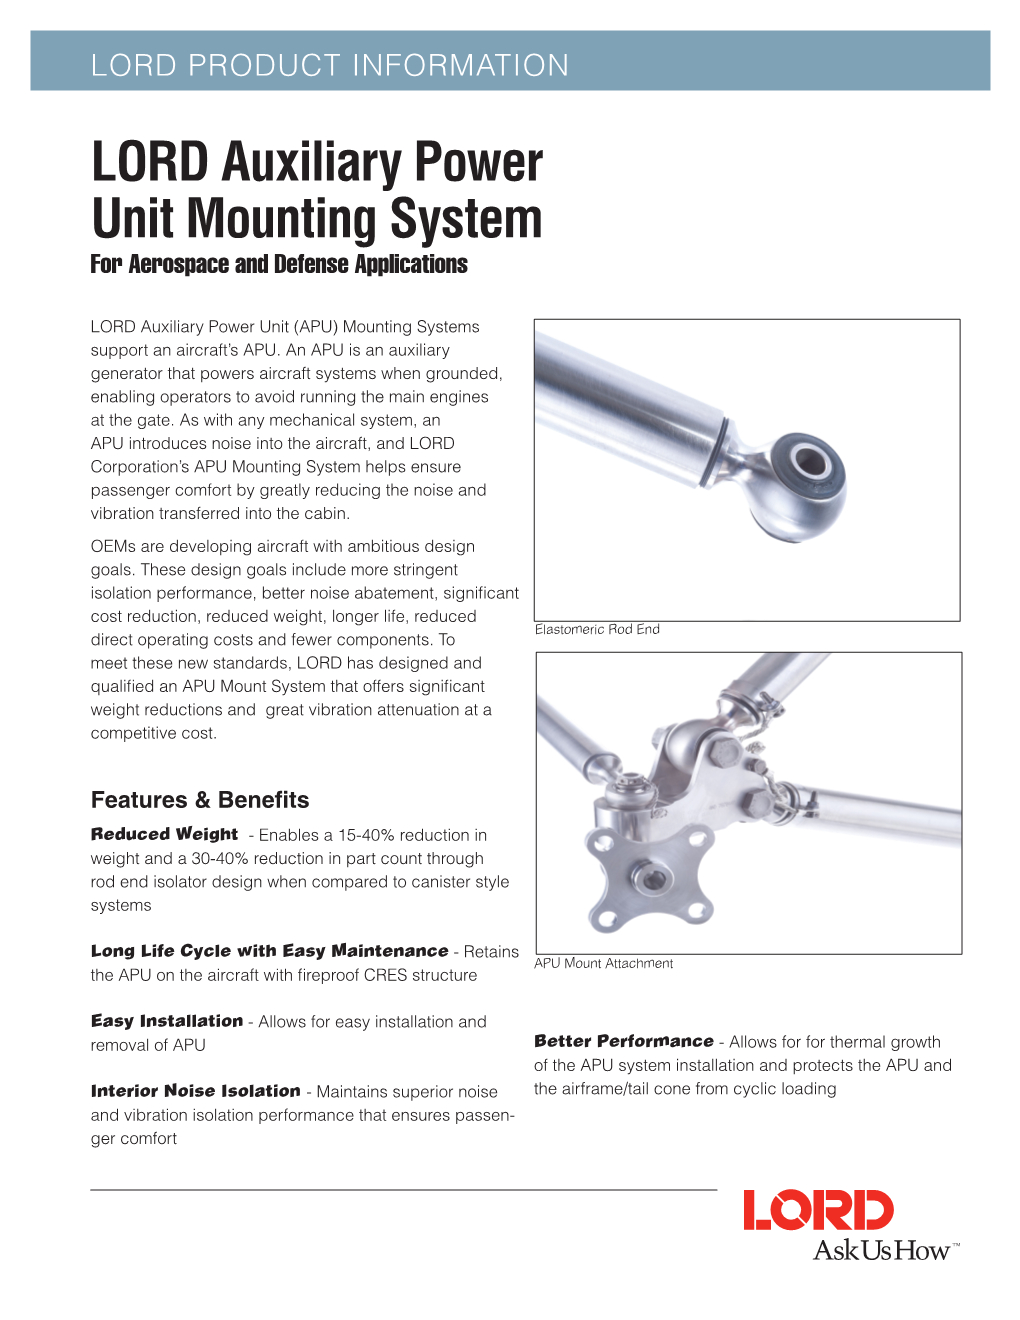 LORD Auxiliary Power Unit Mounting System for Aerospace and Defense Applications